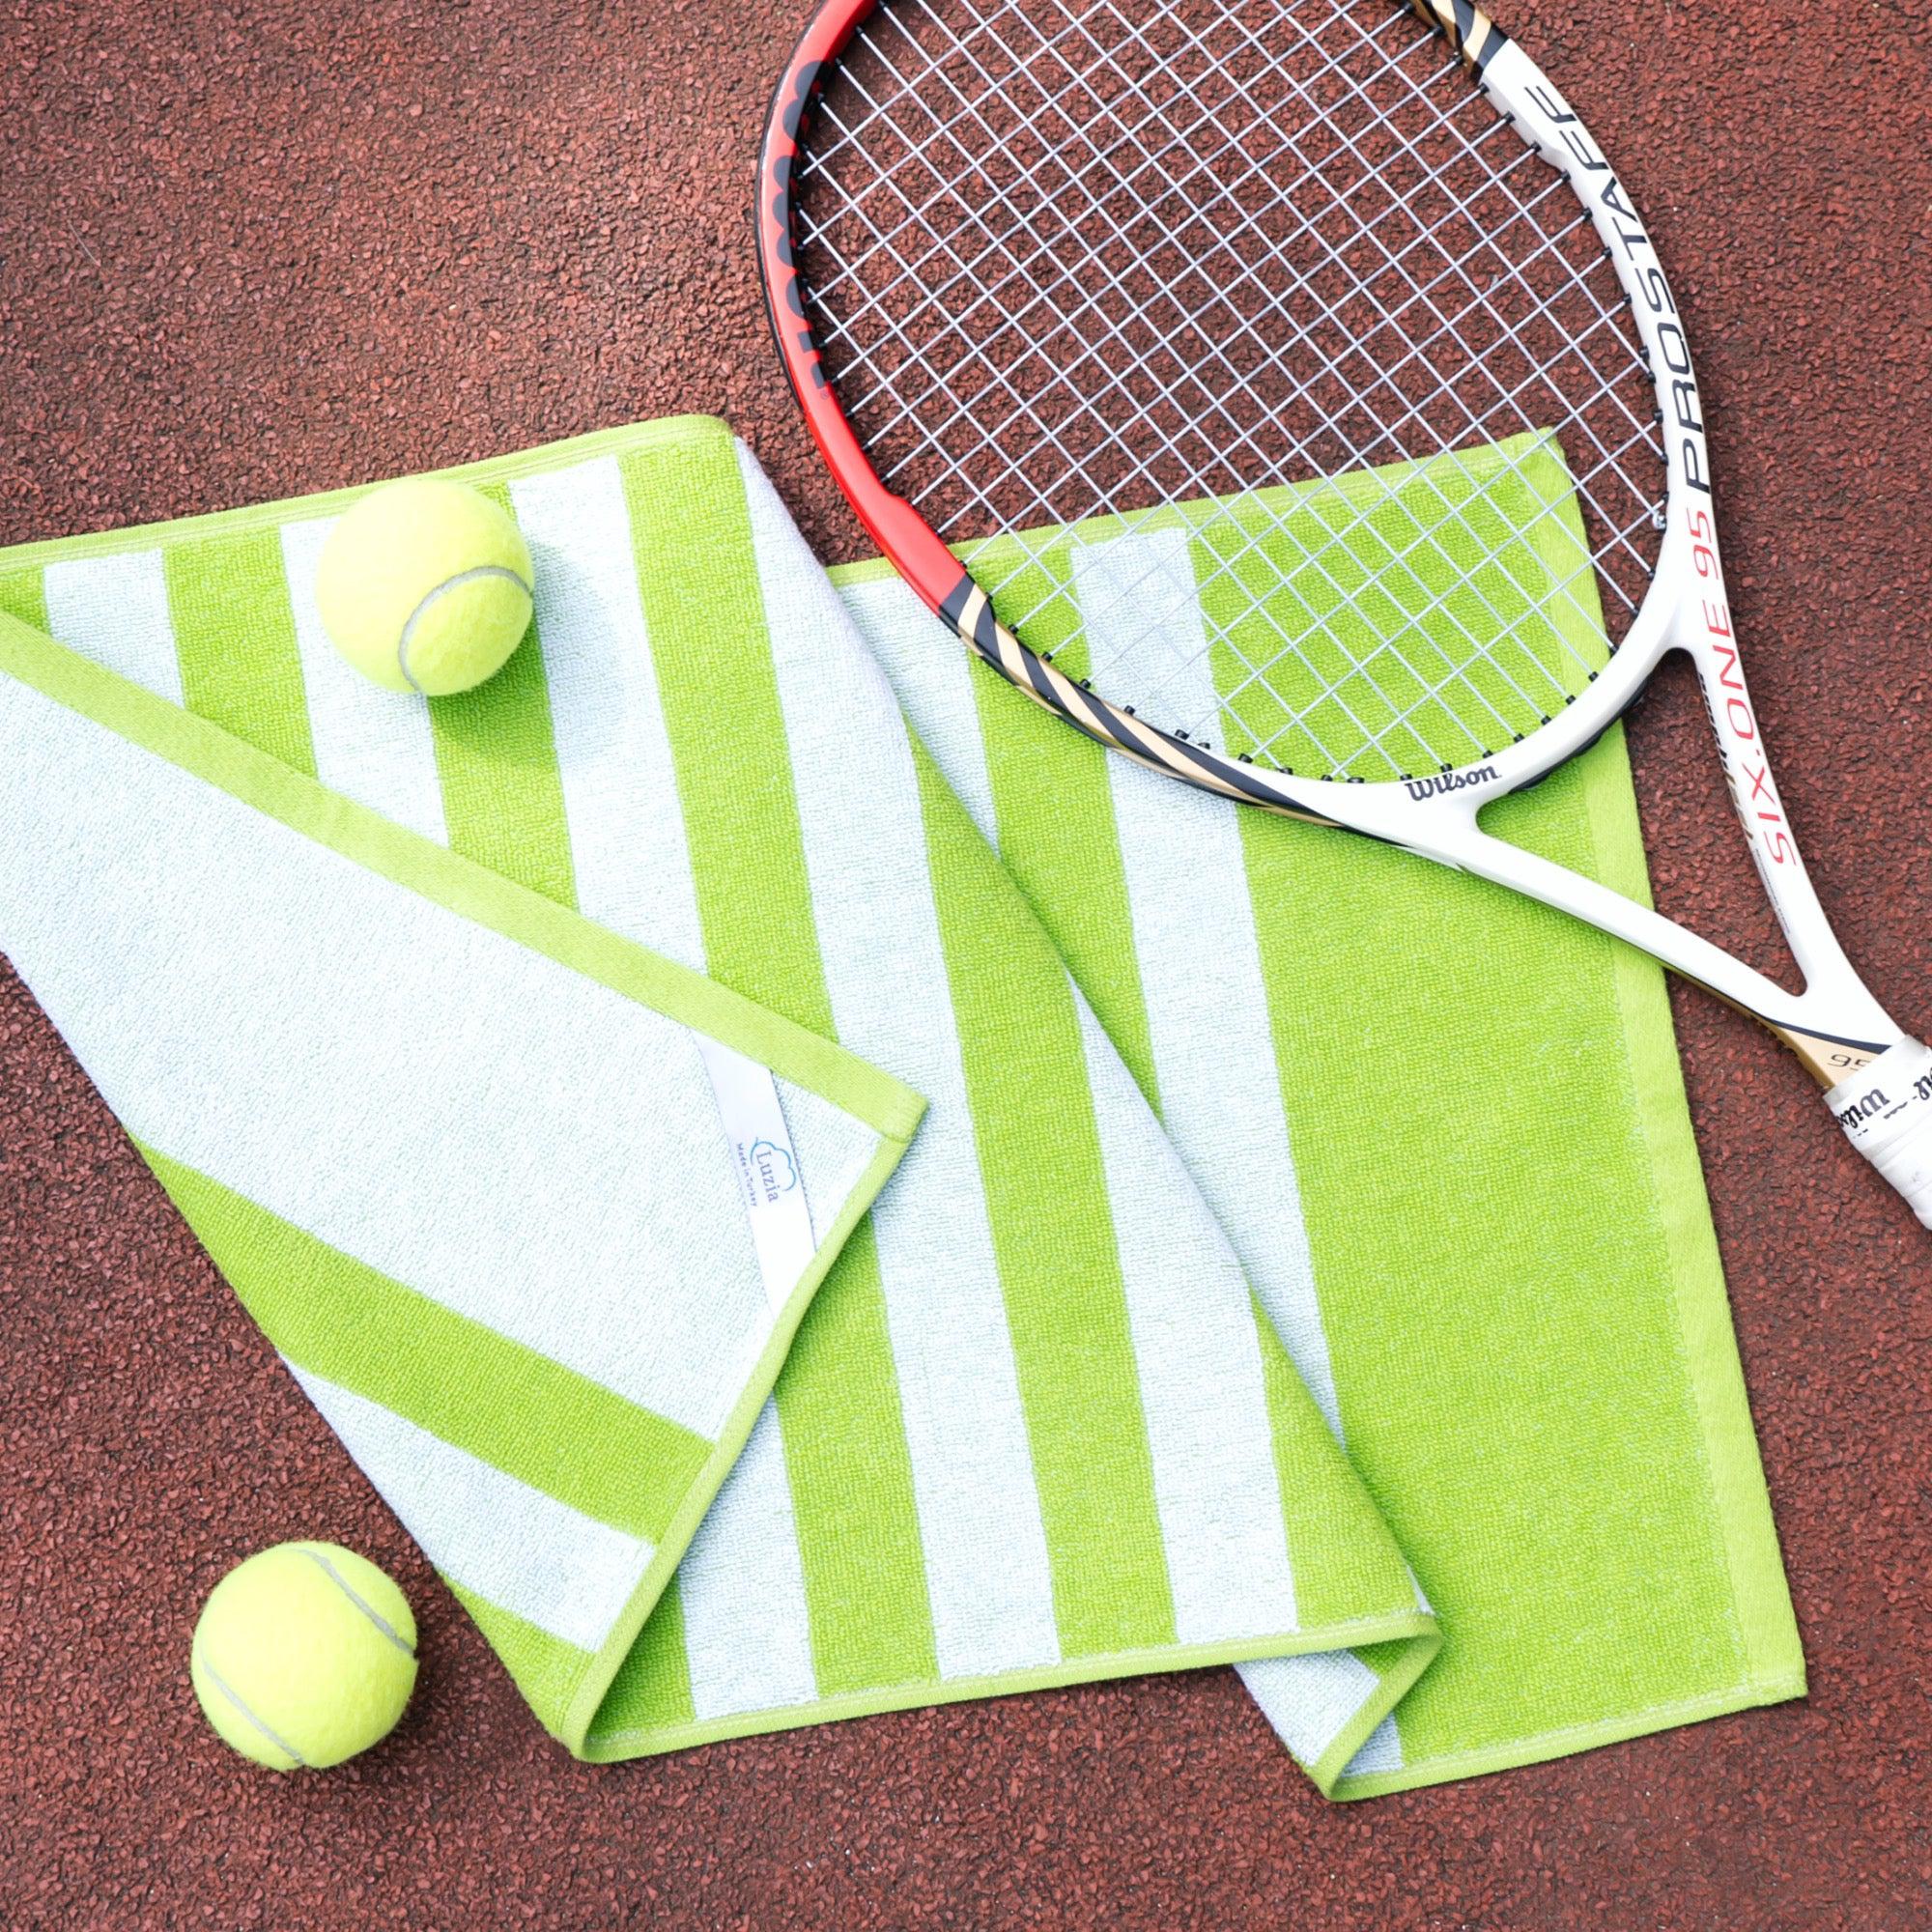 Sweat Management, Equipment Protection, and More: The Benefits of a Sports Towel